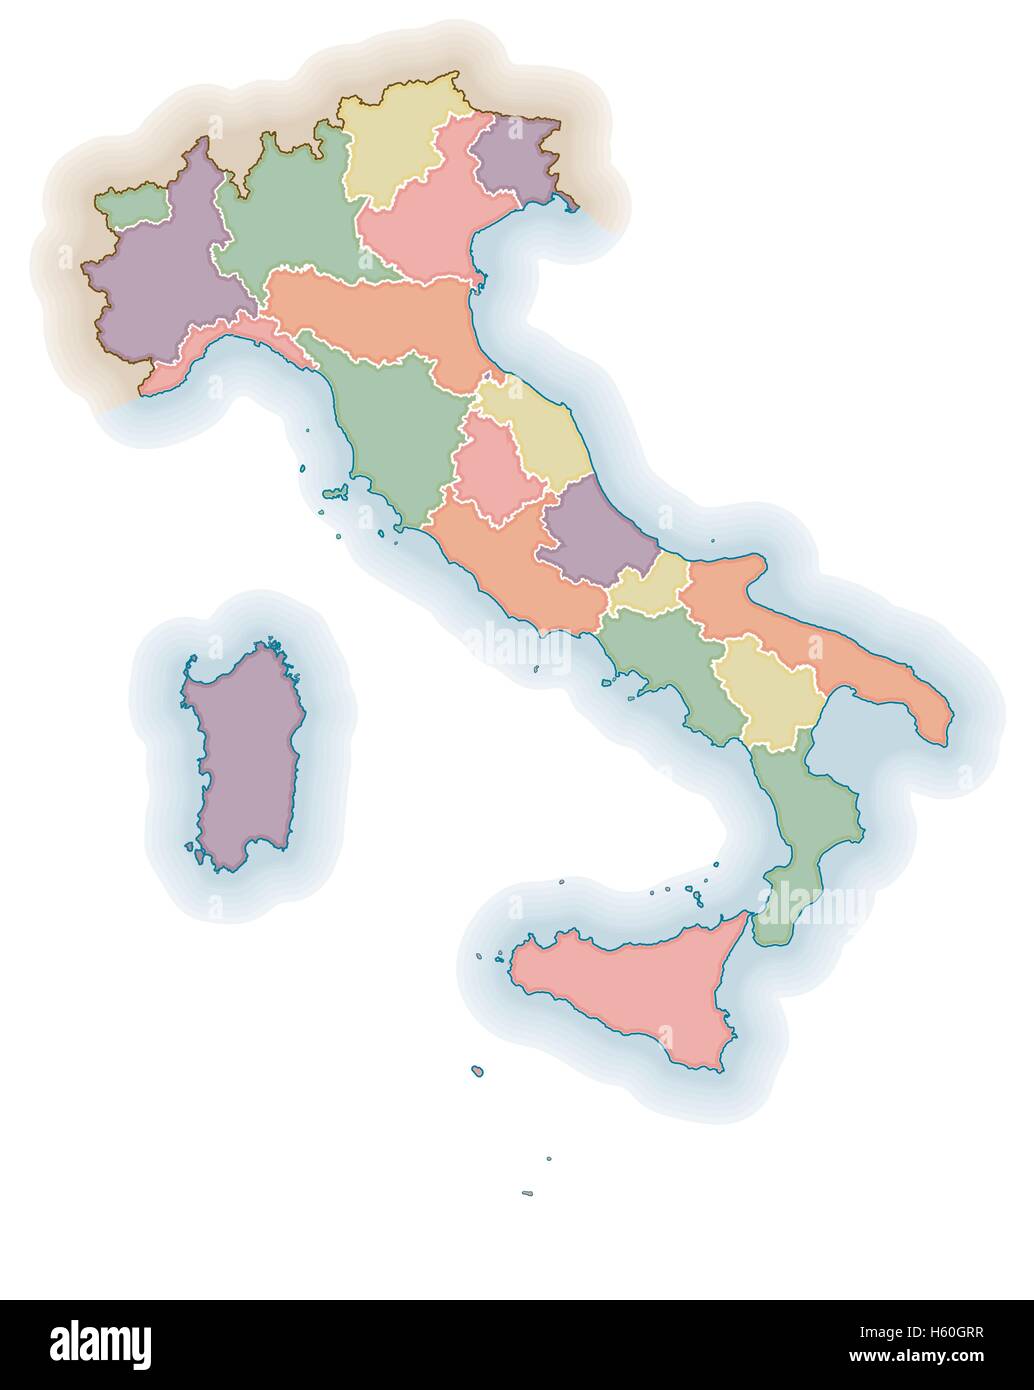 Italian regions borders blank map. Political map of Italy. One layer for each region. Stock Vector